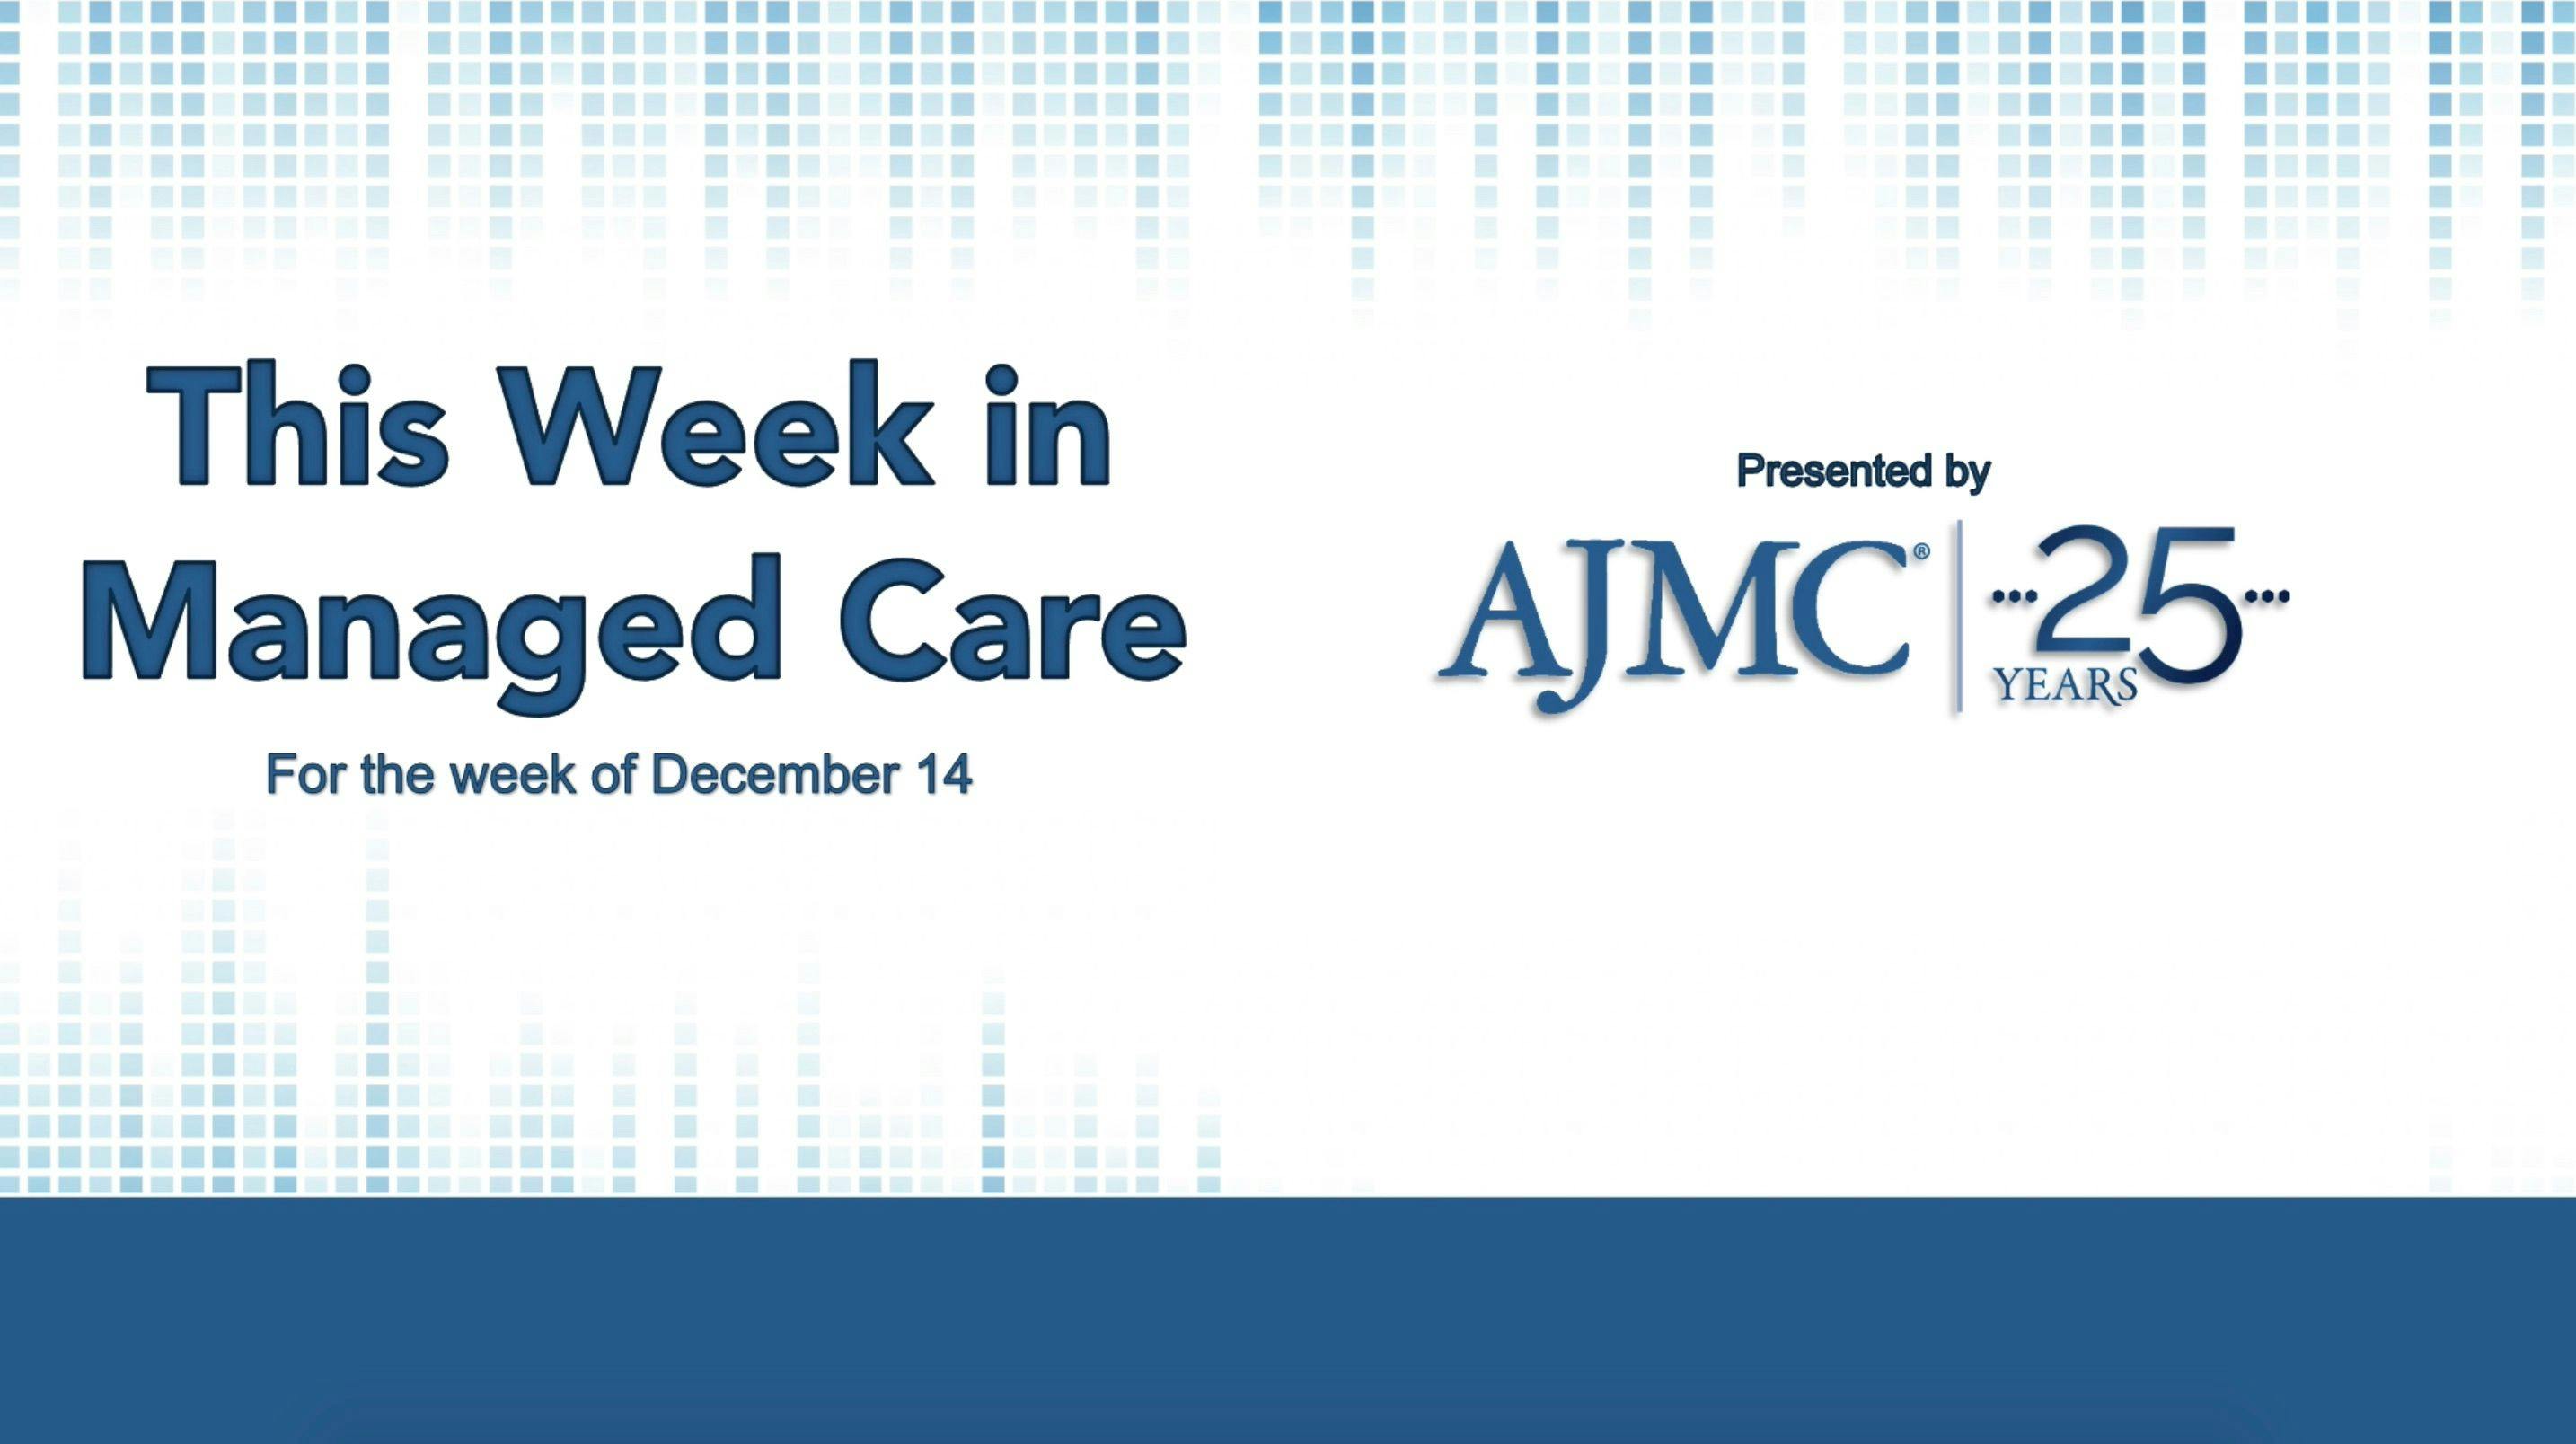 This Week in Managed Care: December 18, 2020